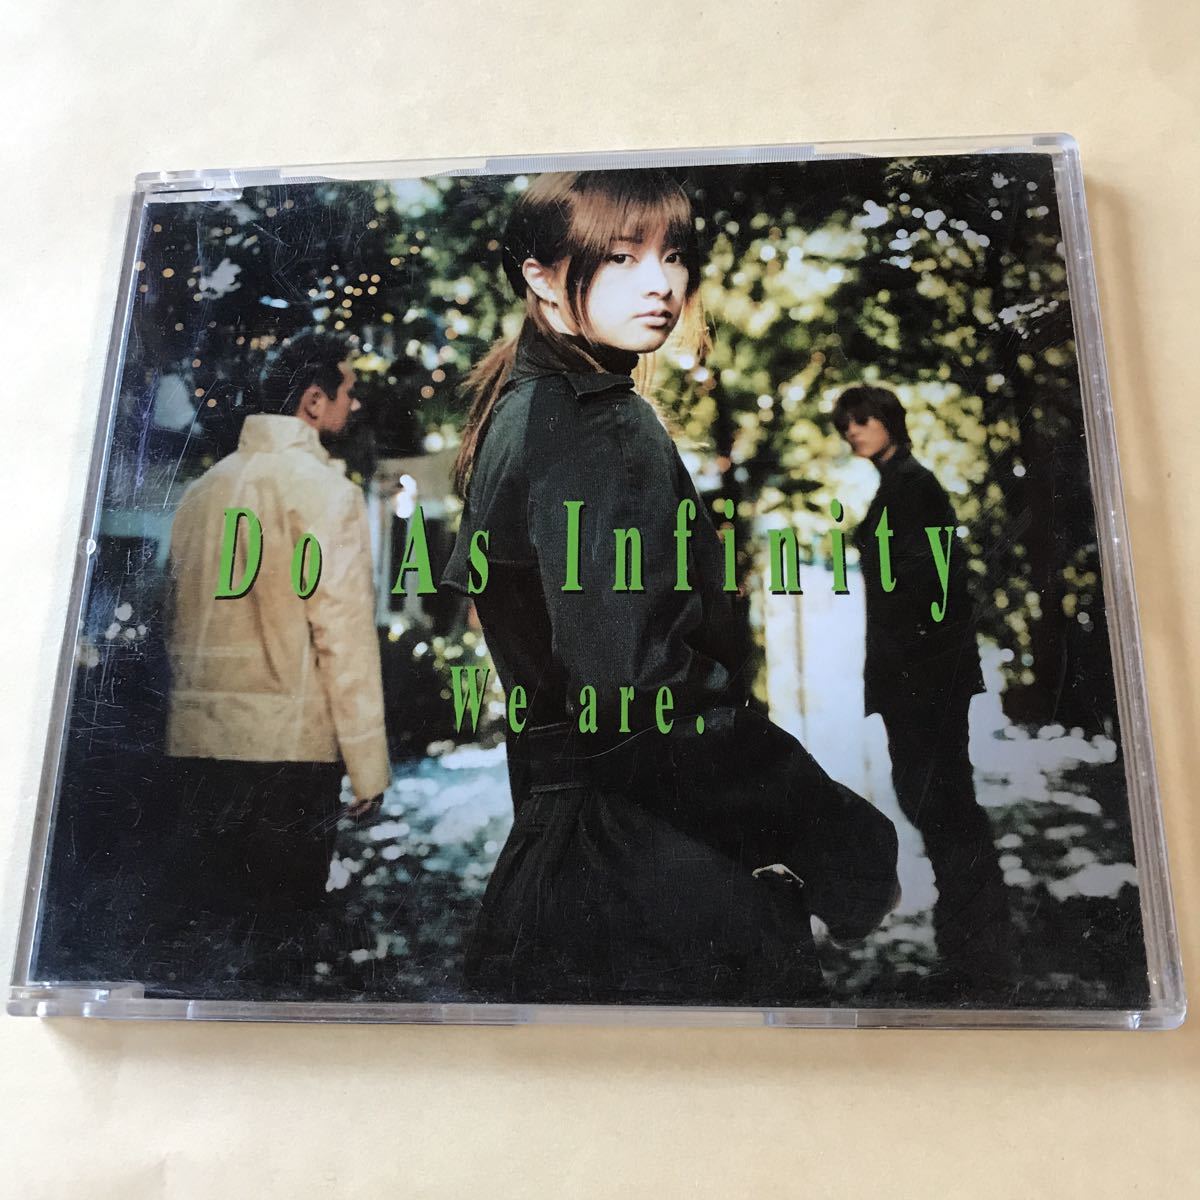 Do レビューを書けば送料当店負担 As Infinity We ついに入荷 1MaxiCD are.